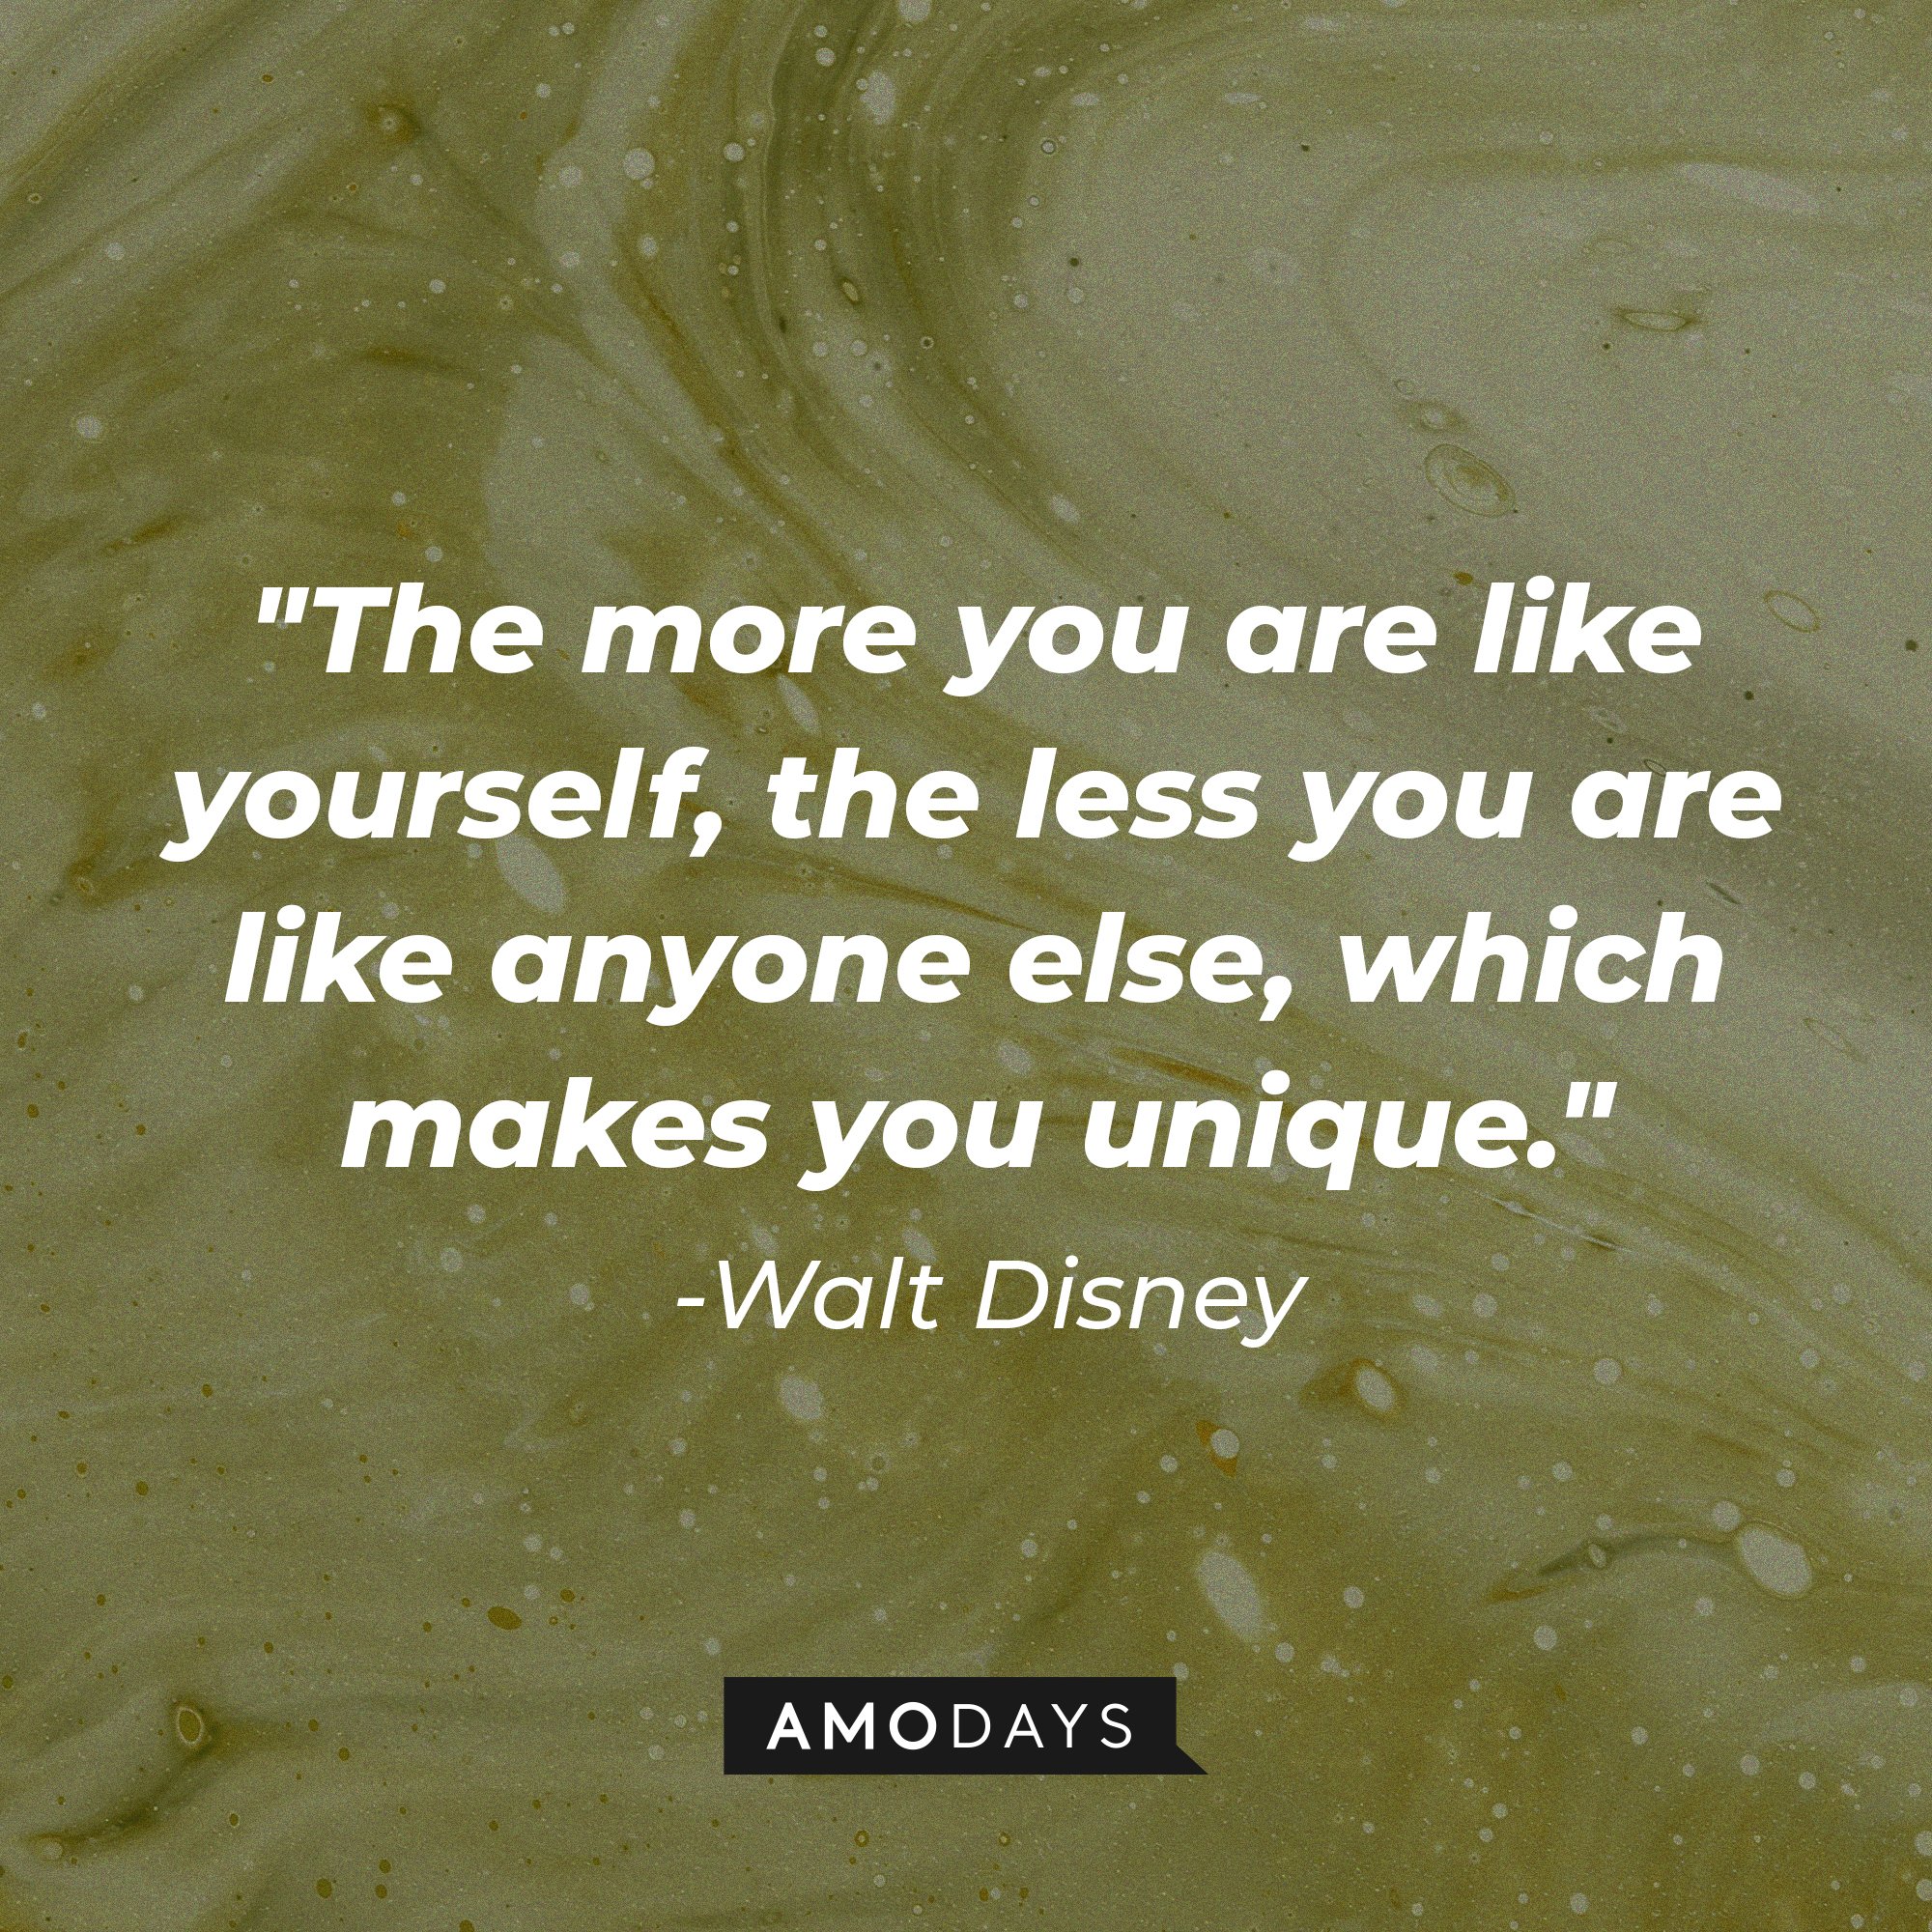 Walt Disney’s quote: "The more you are like yourself, the less you are like anyone else, which makes you unique." | Image: AmoDays